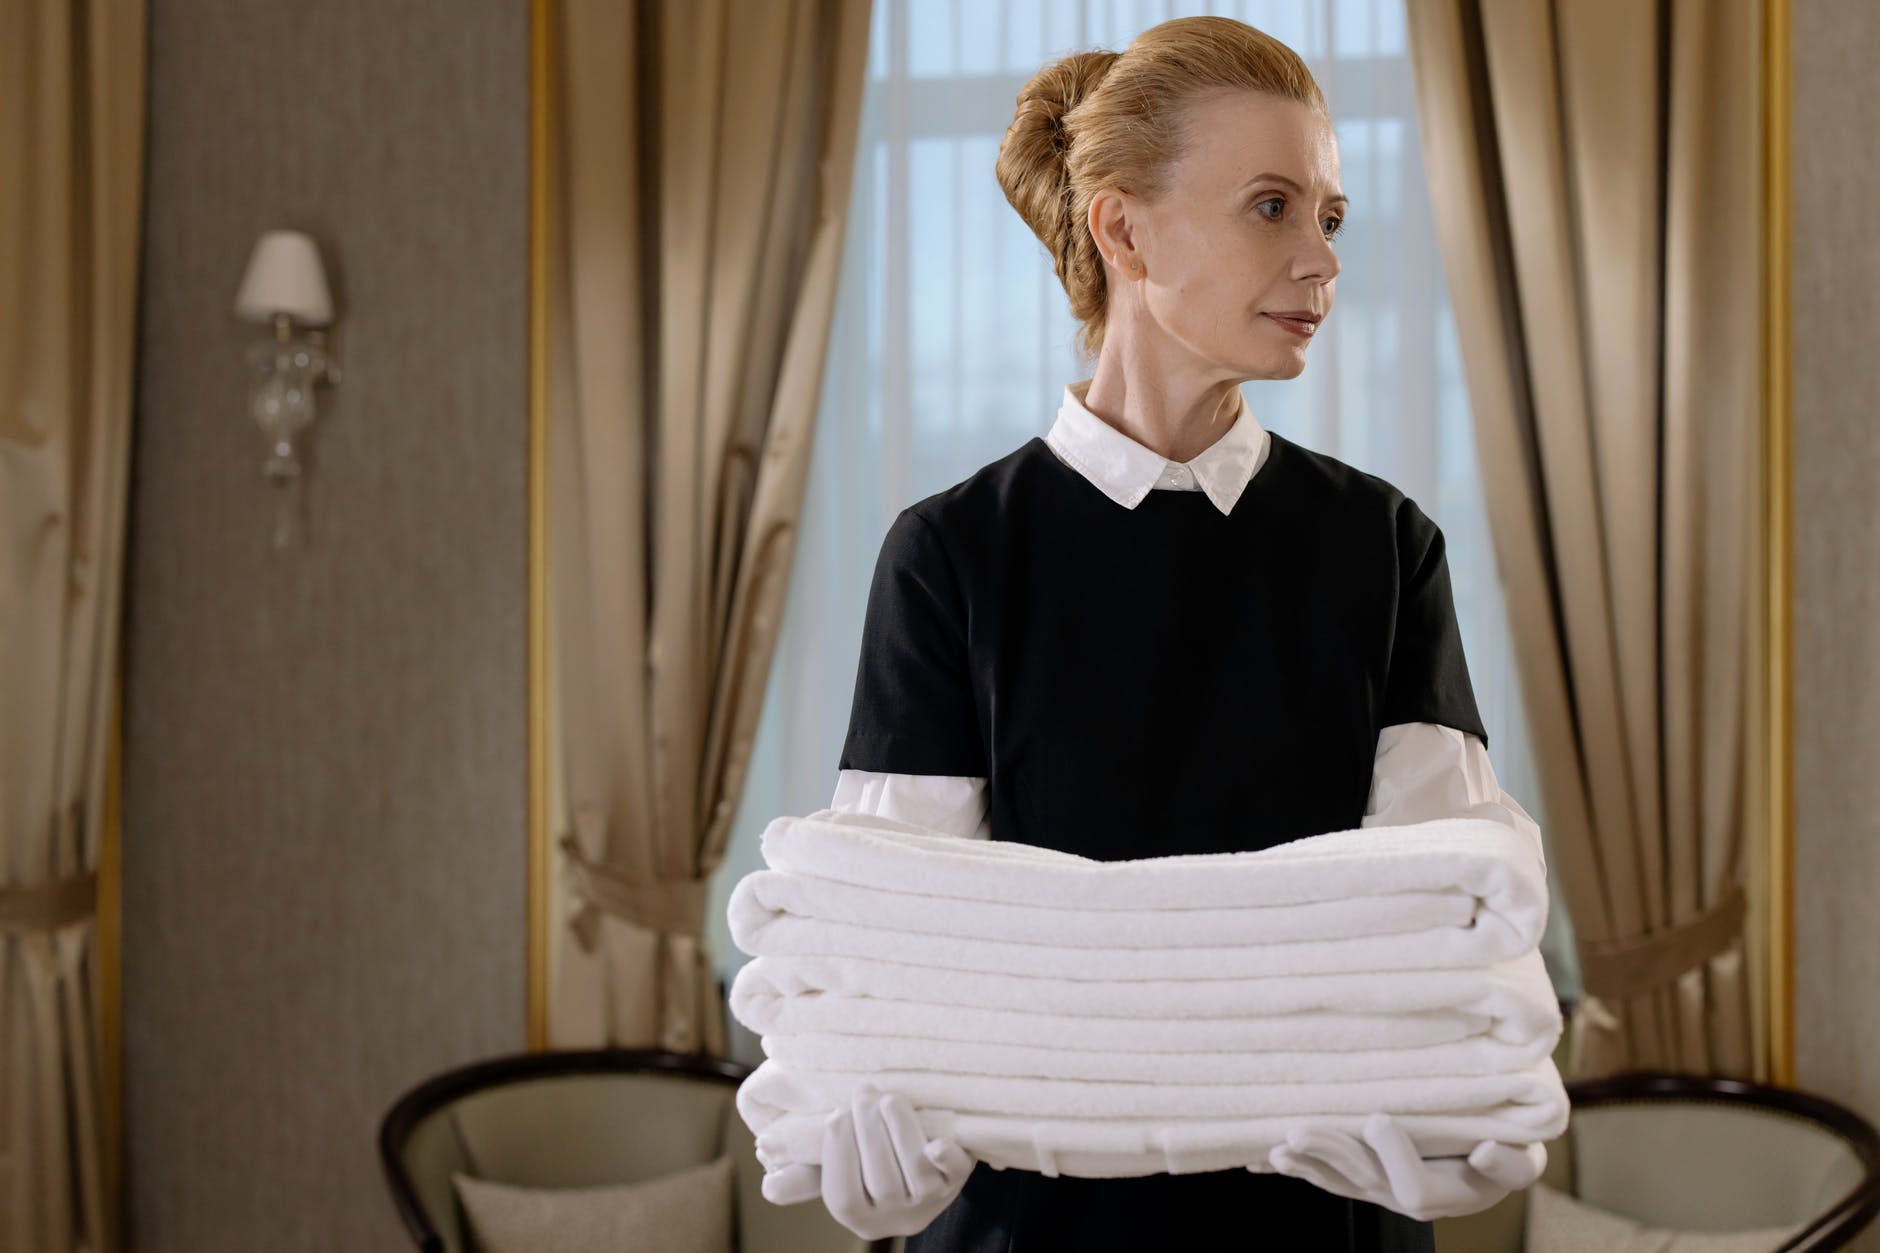 A housemaid carrying a pile of folded towels | Source: Pexels